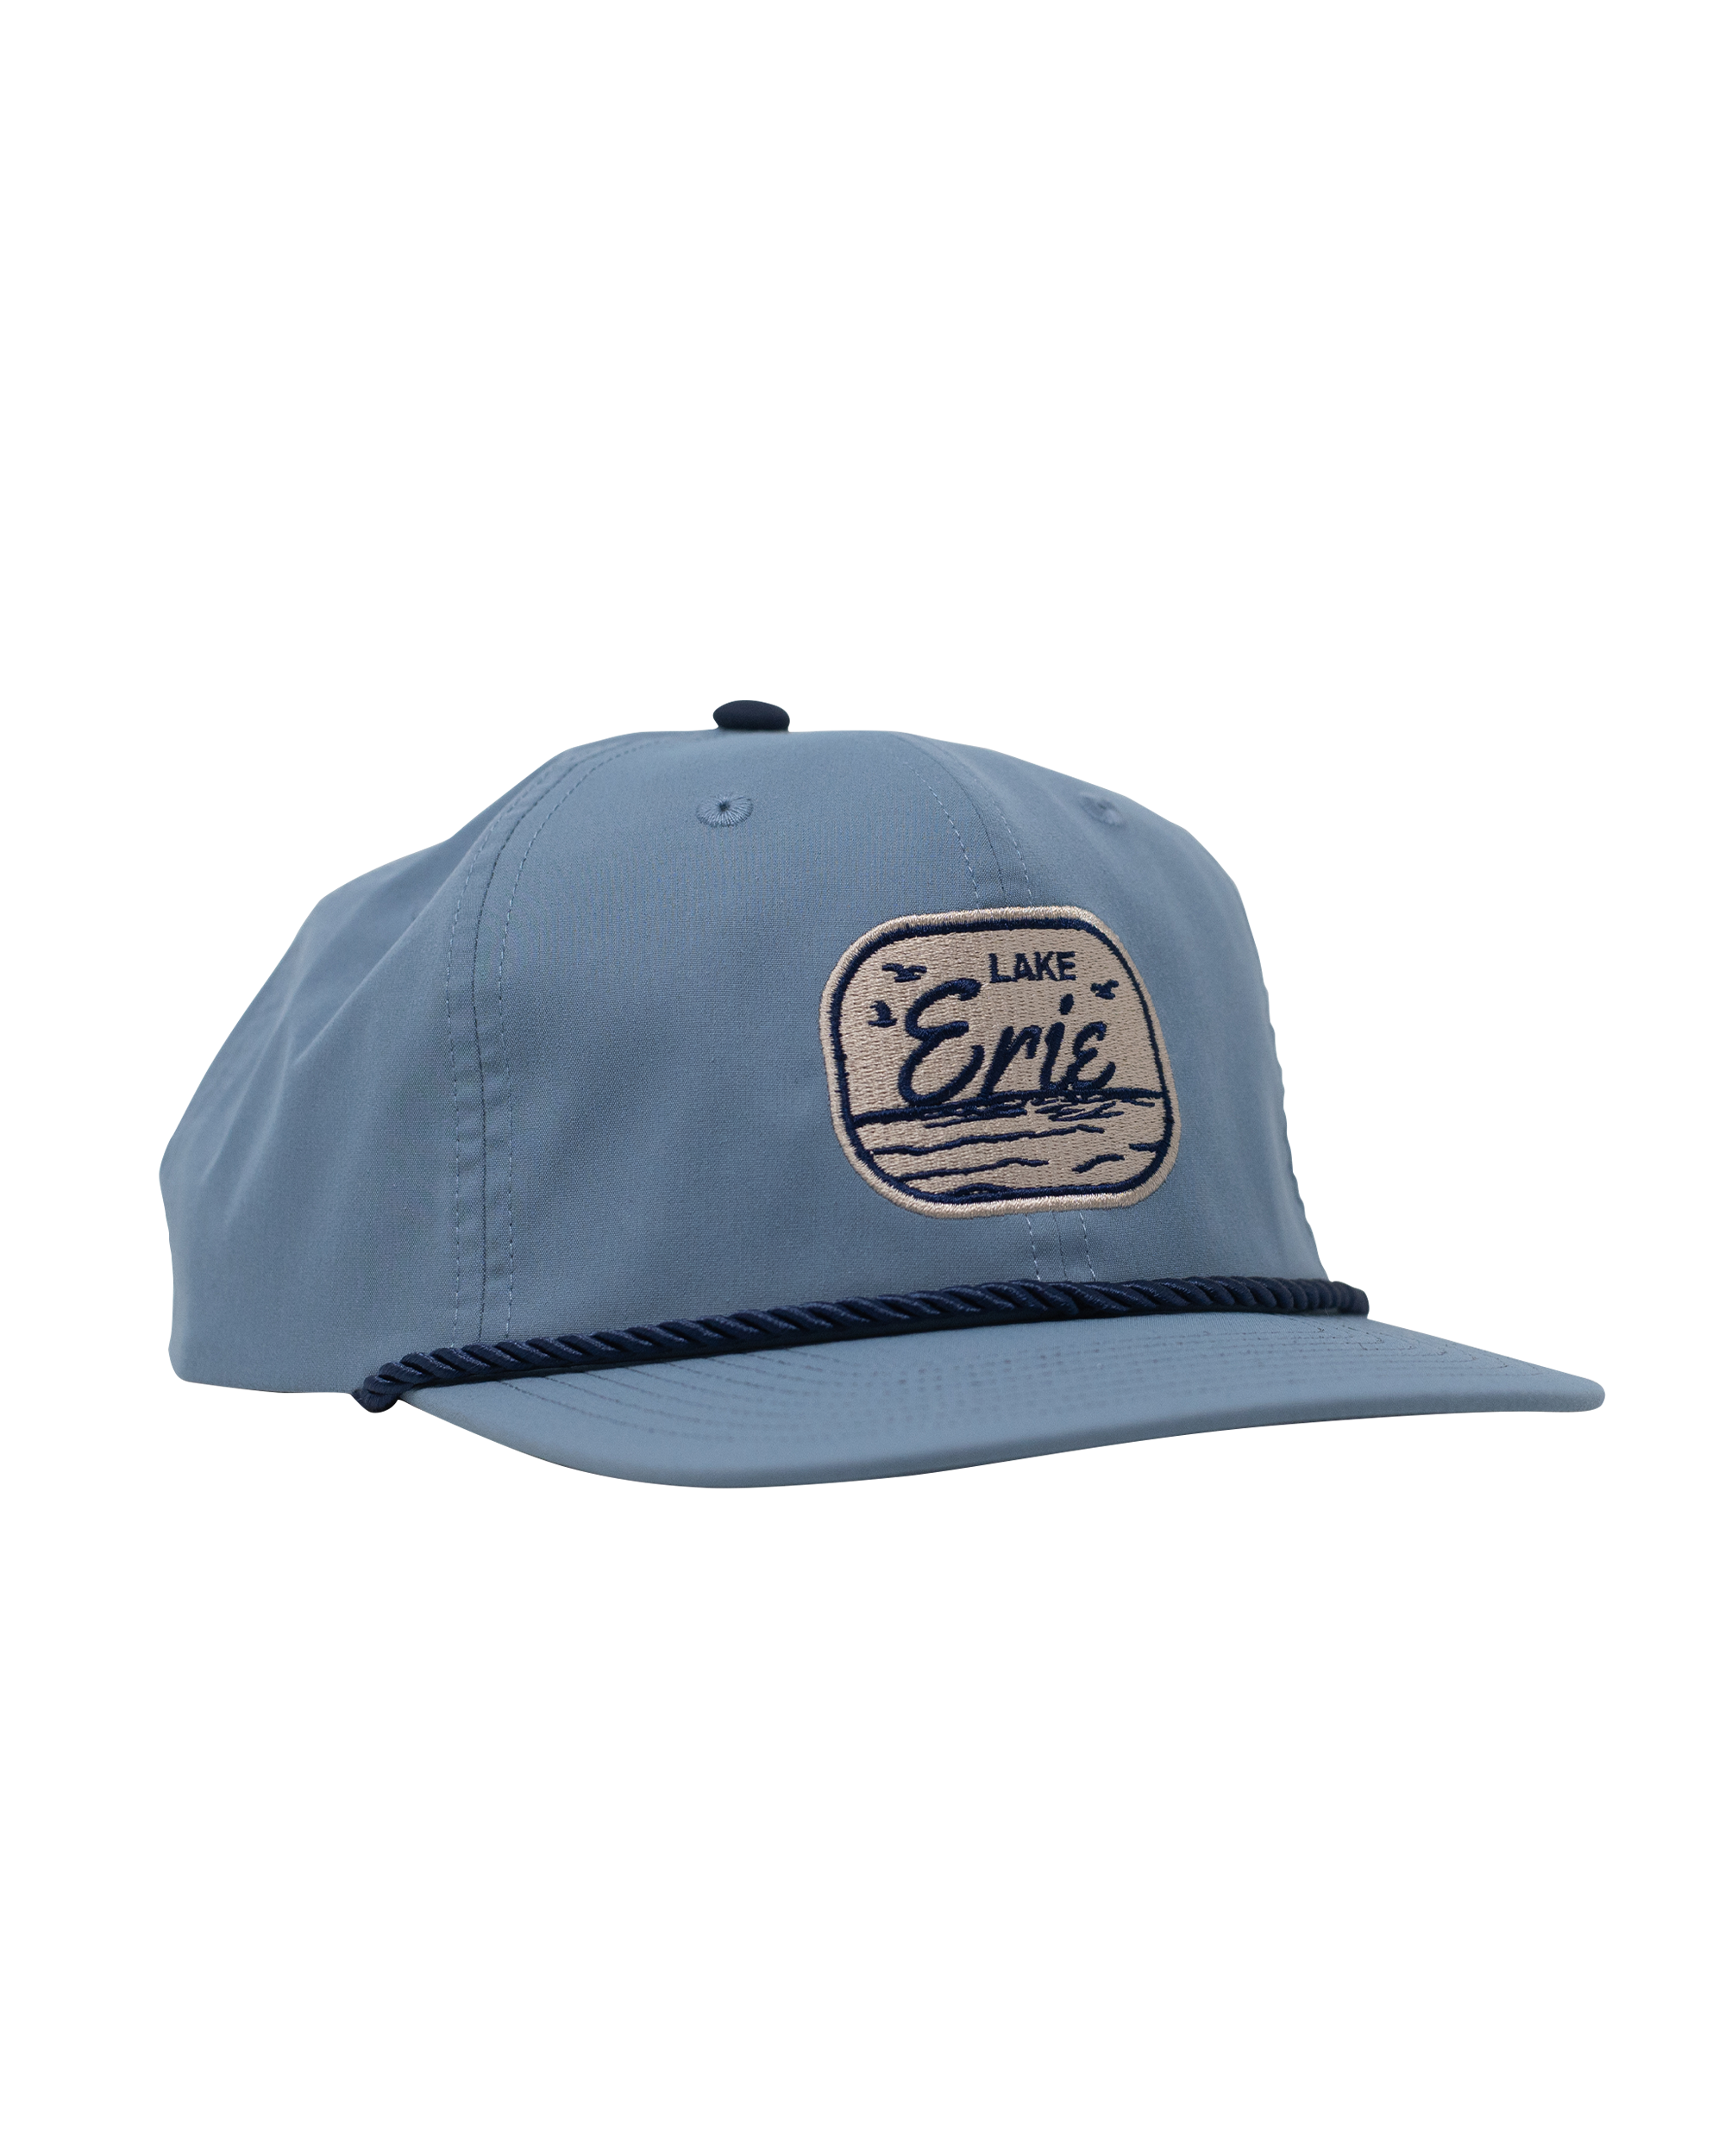 Lake Erie Rope Blue Hat